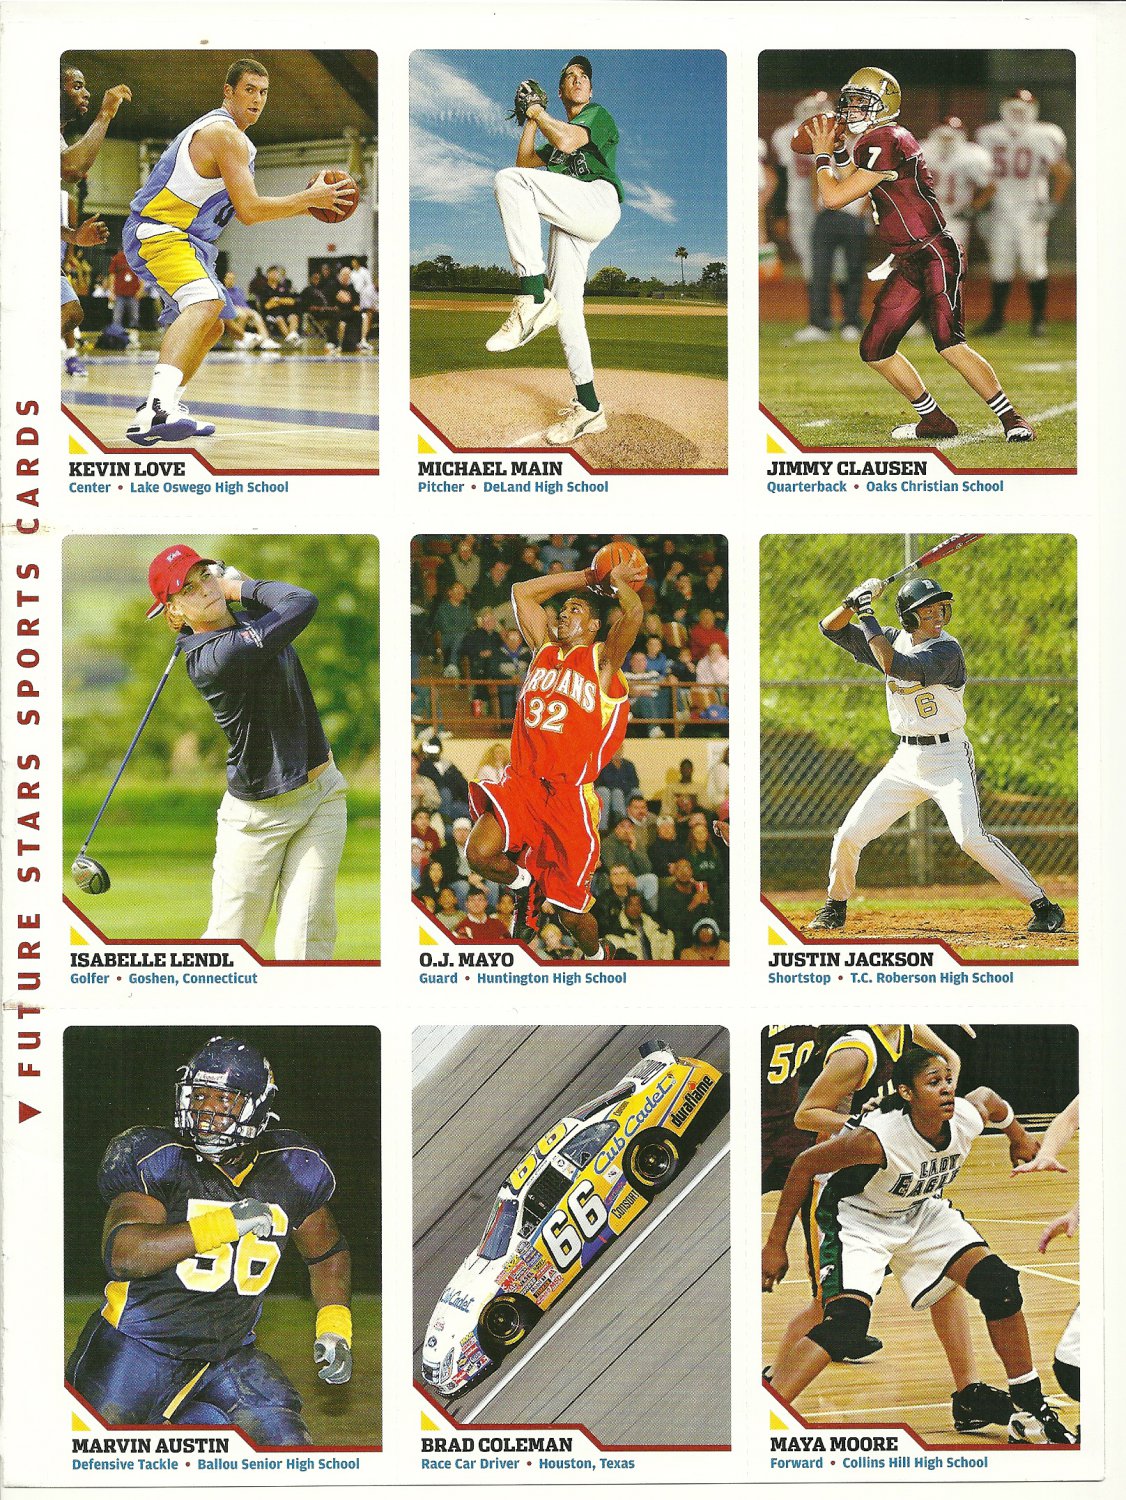 SI SPORTS ILLUSTRATED FOR KIDS Sheet of 9 Trading Cards #118-126 FUTURE STARS